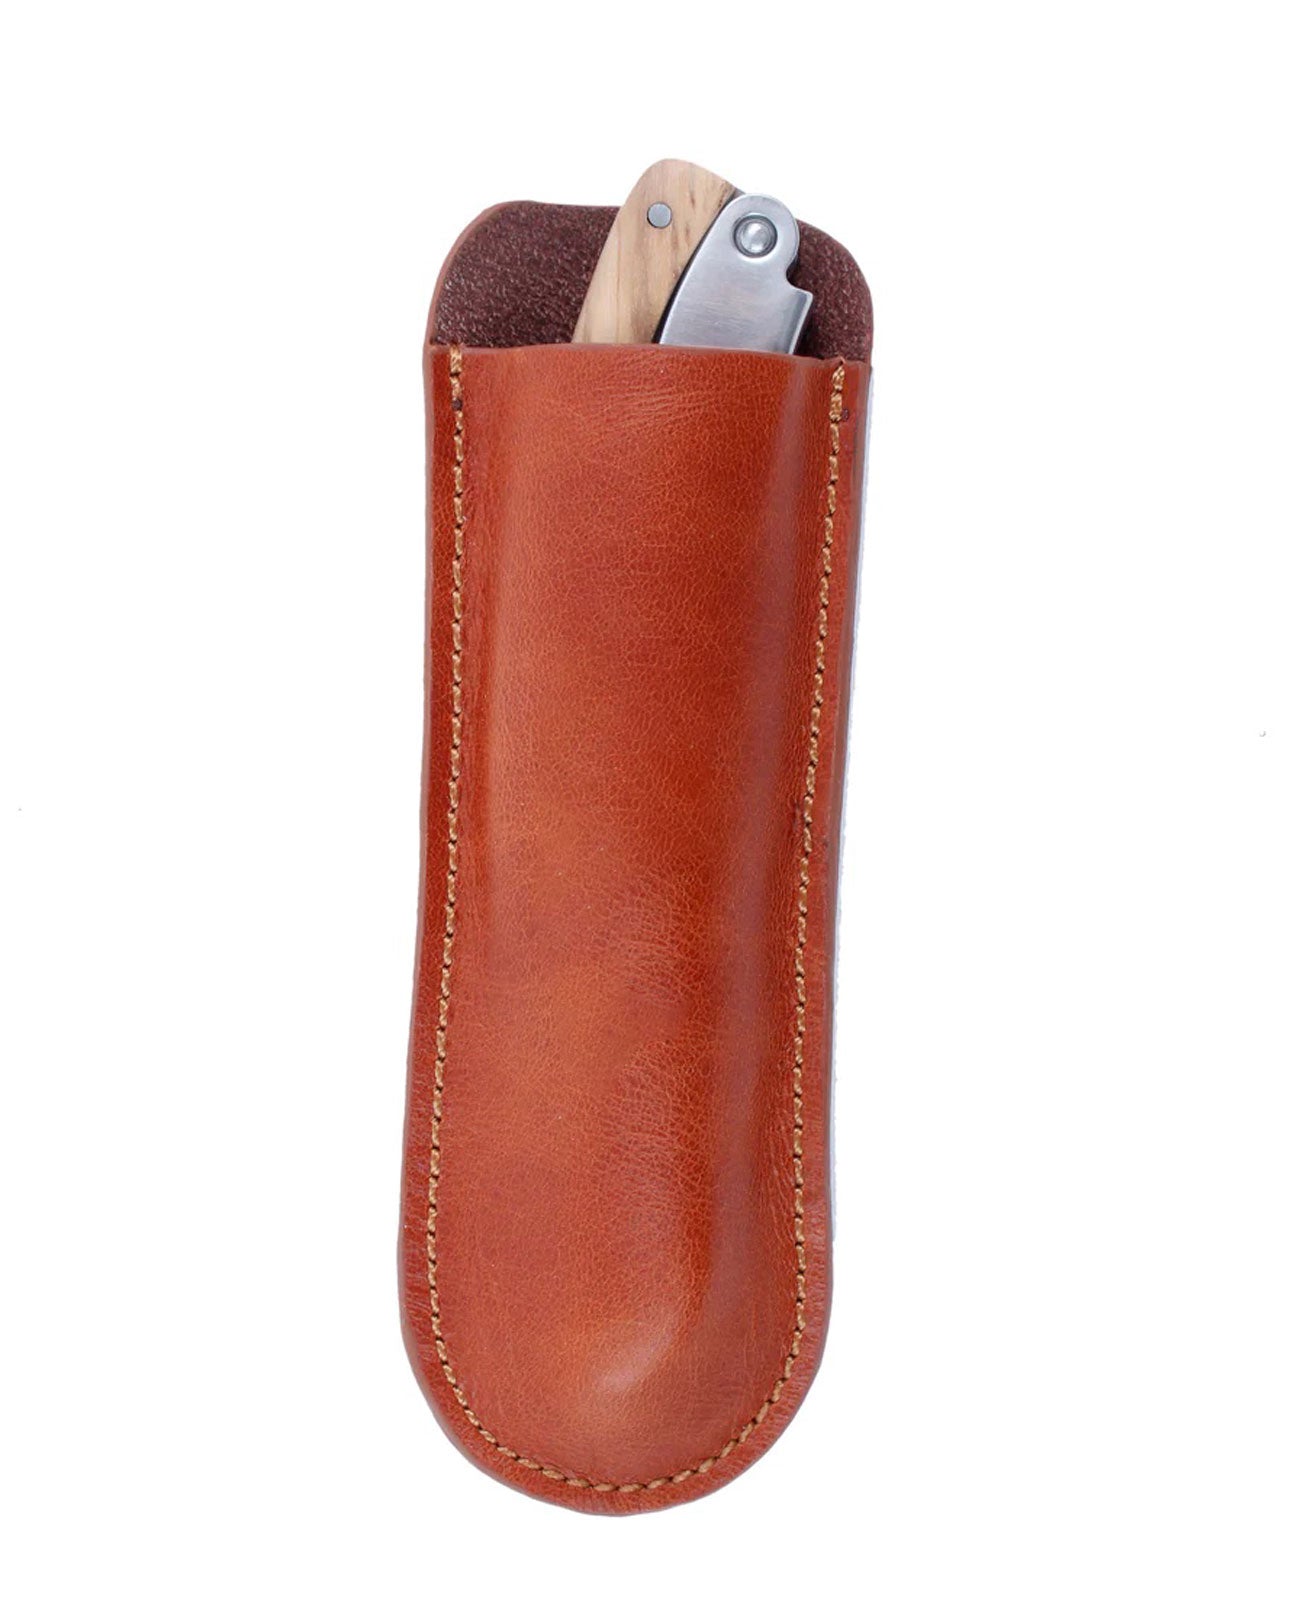 9 CHRISTOPHER Corkscrew with Leather Sleeve in Olivewood available at Lahn.shop